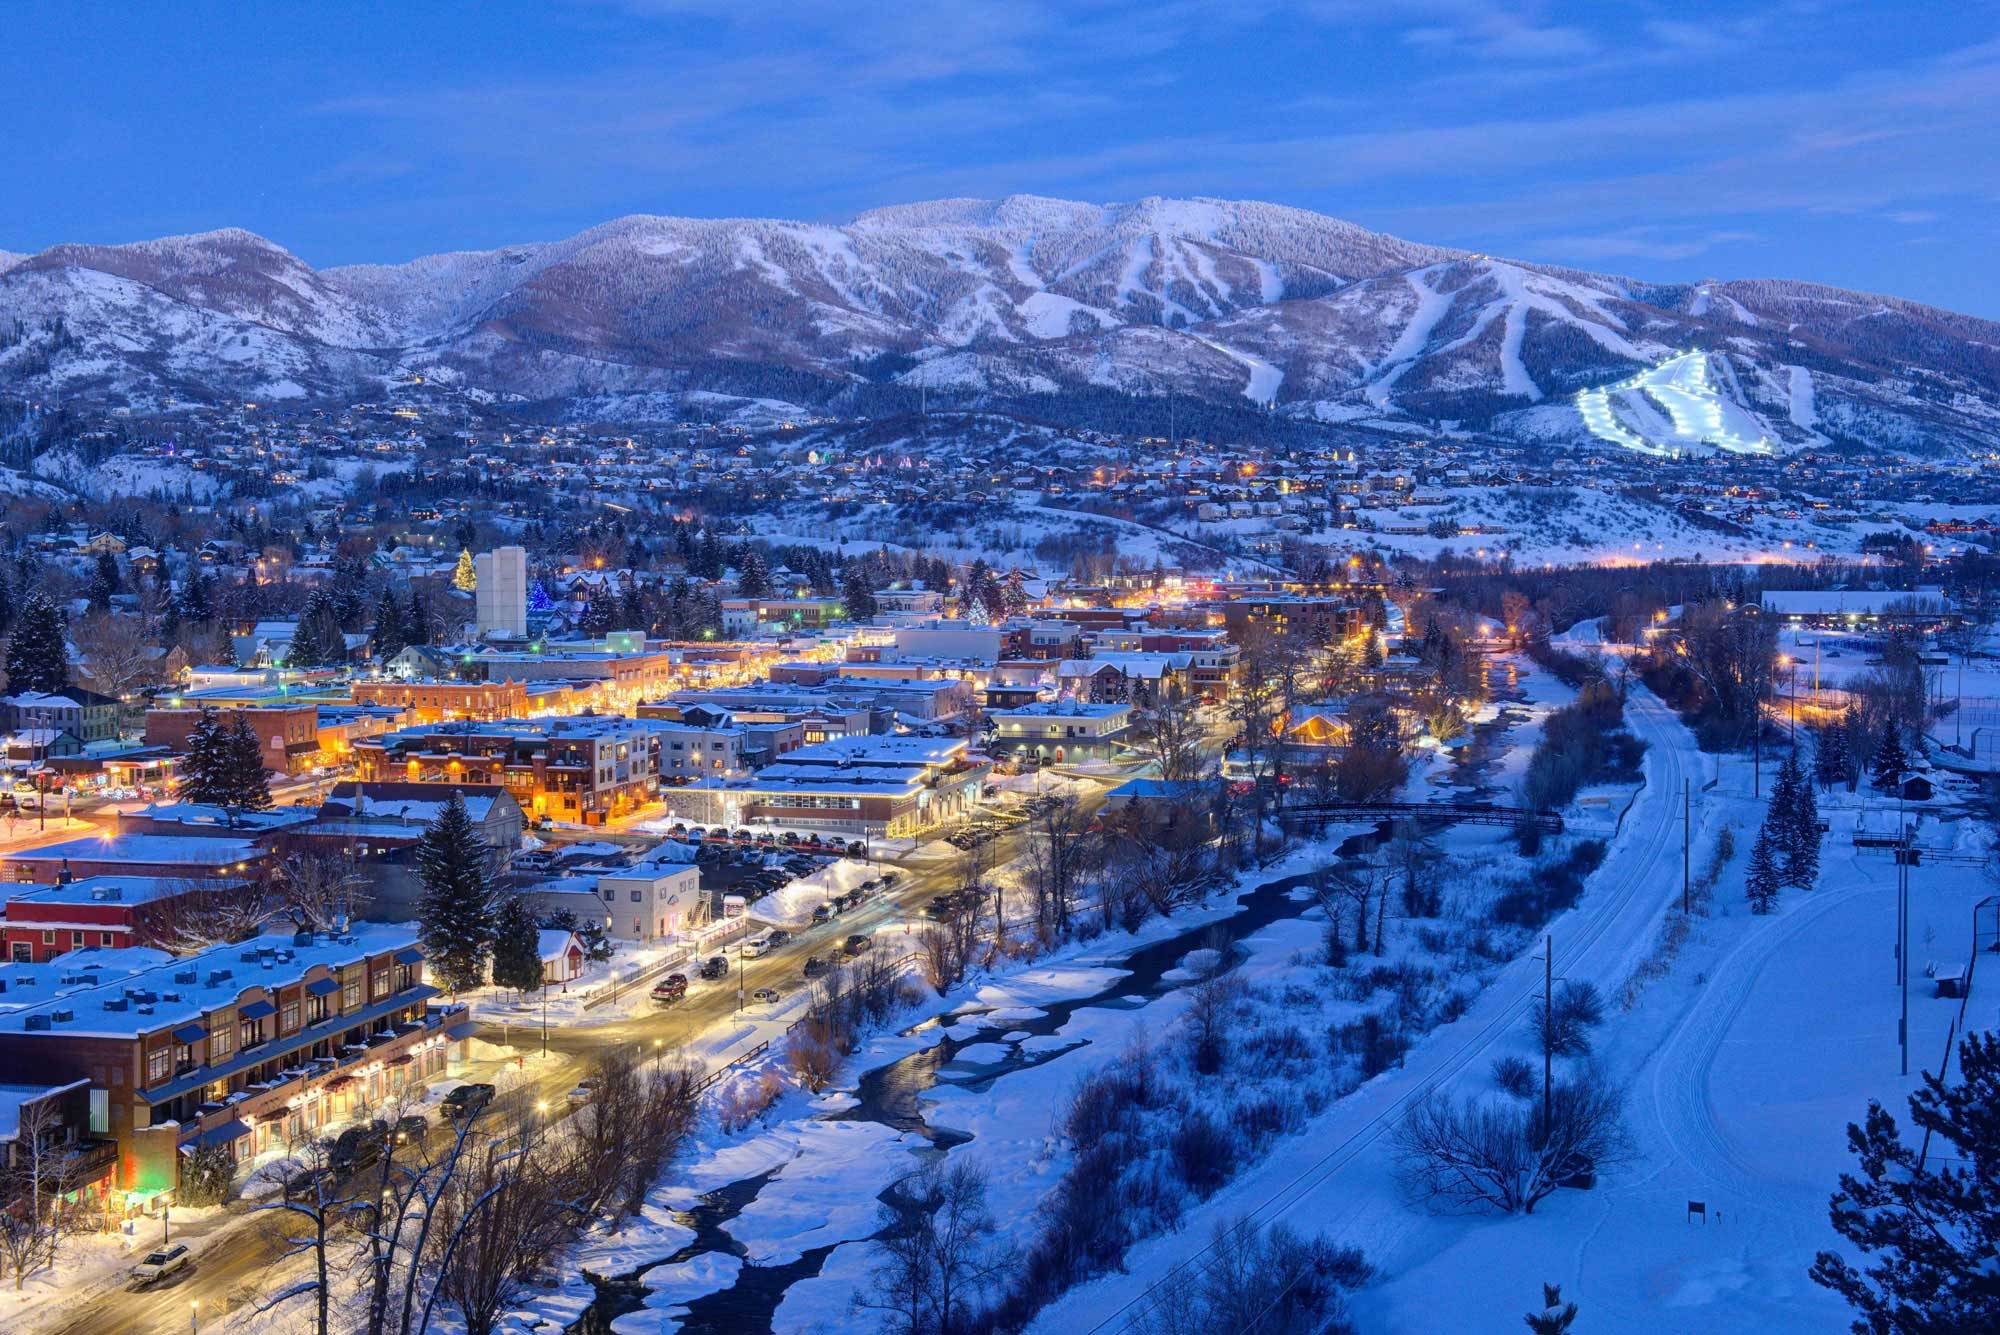 Steamboat Springs, Colorado, at dust in the winter